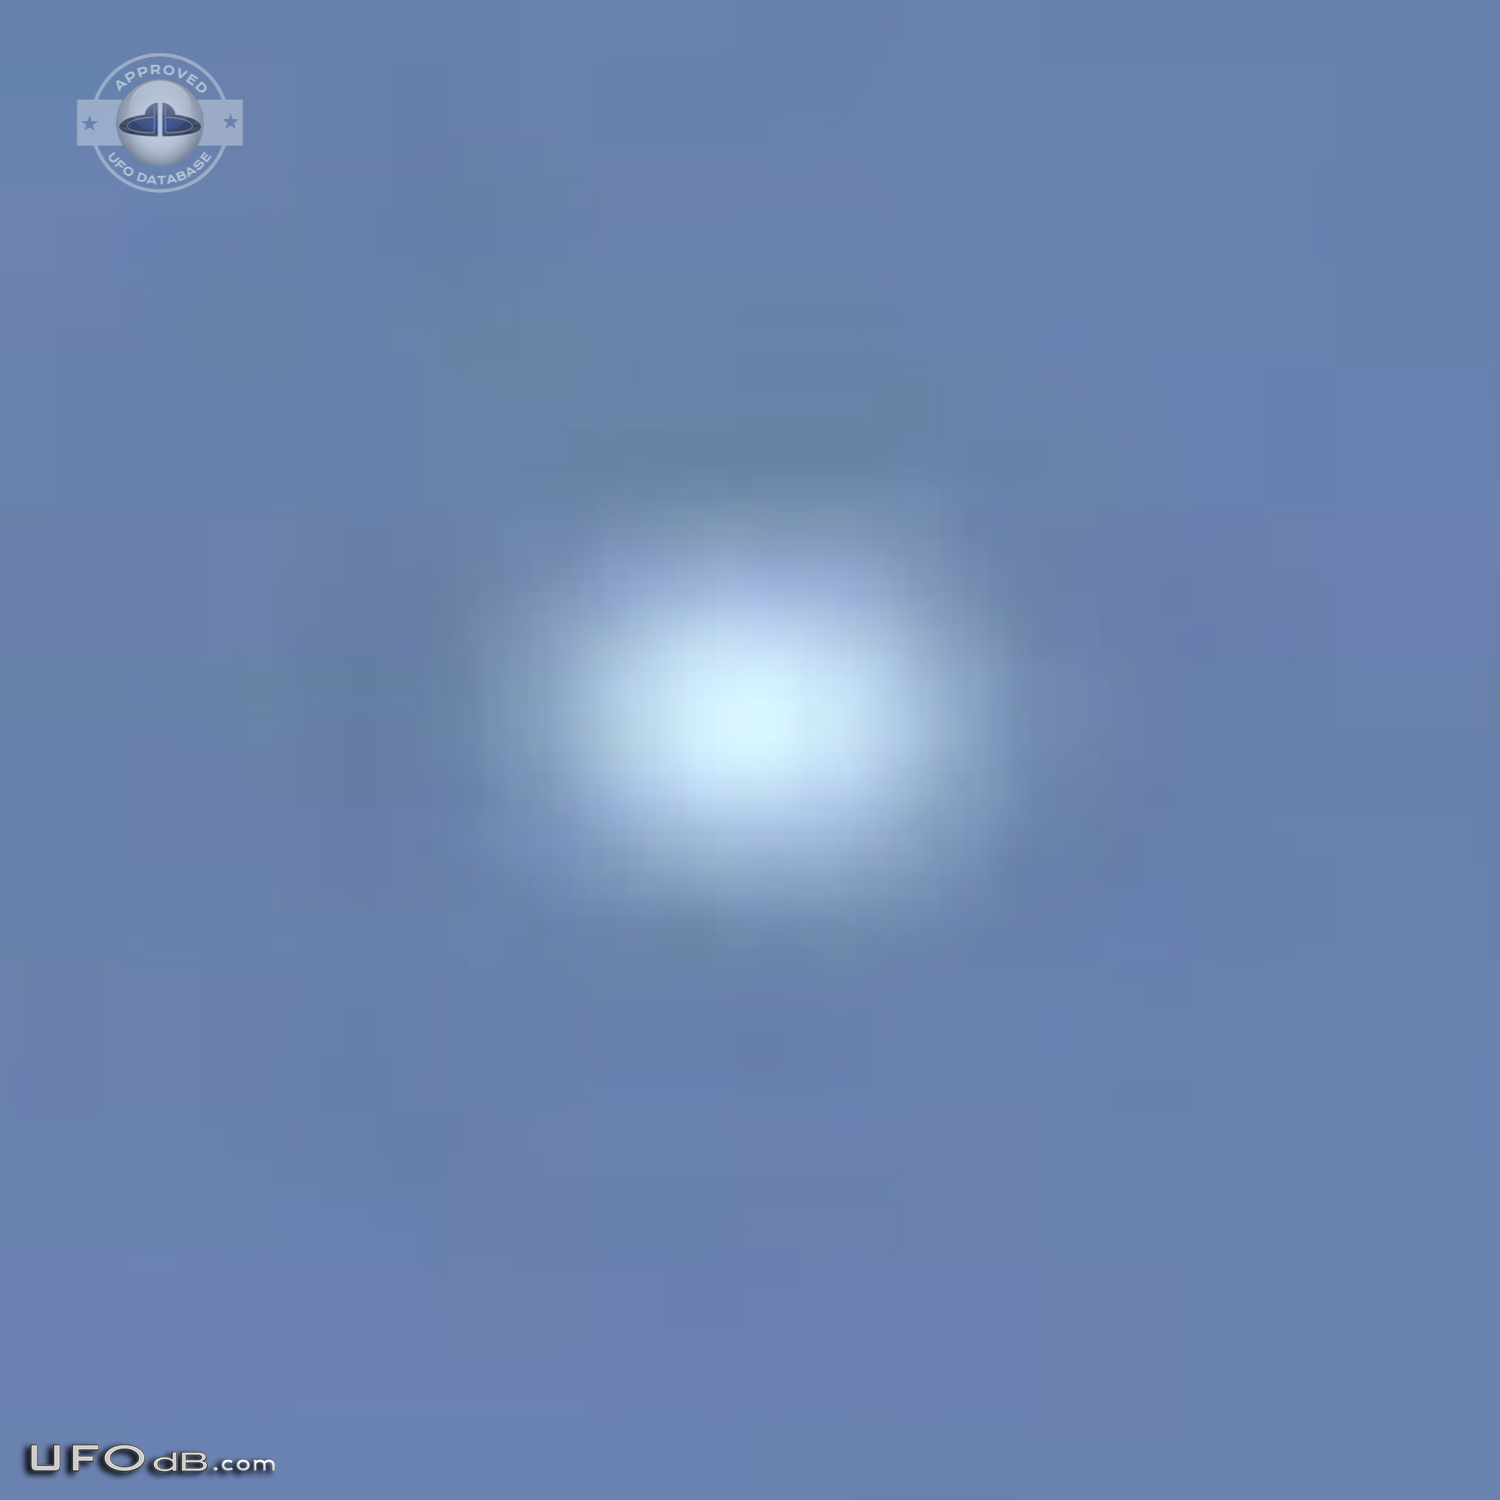 White spherical UFO in Ontario caught on picture Kitchener Canada 2012 UFO Picture #417-4